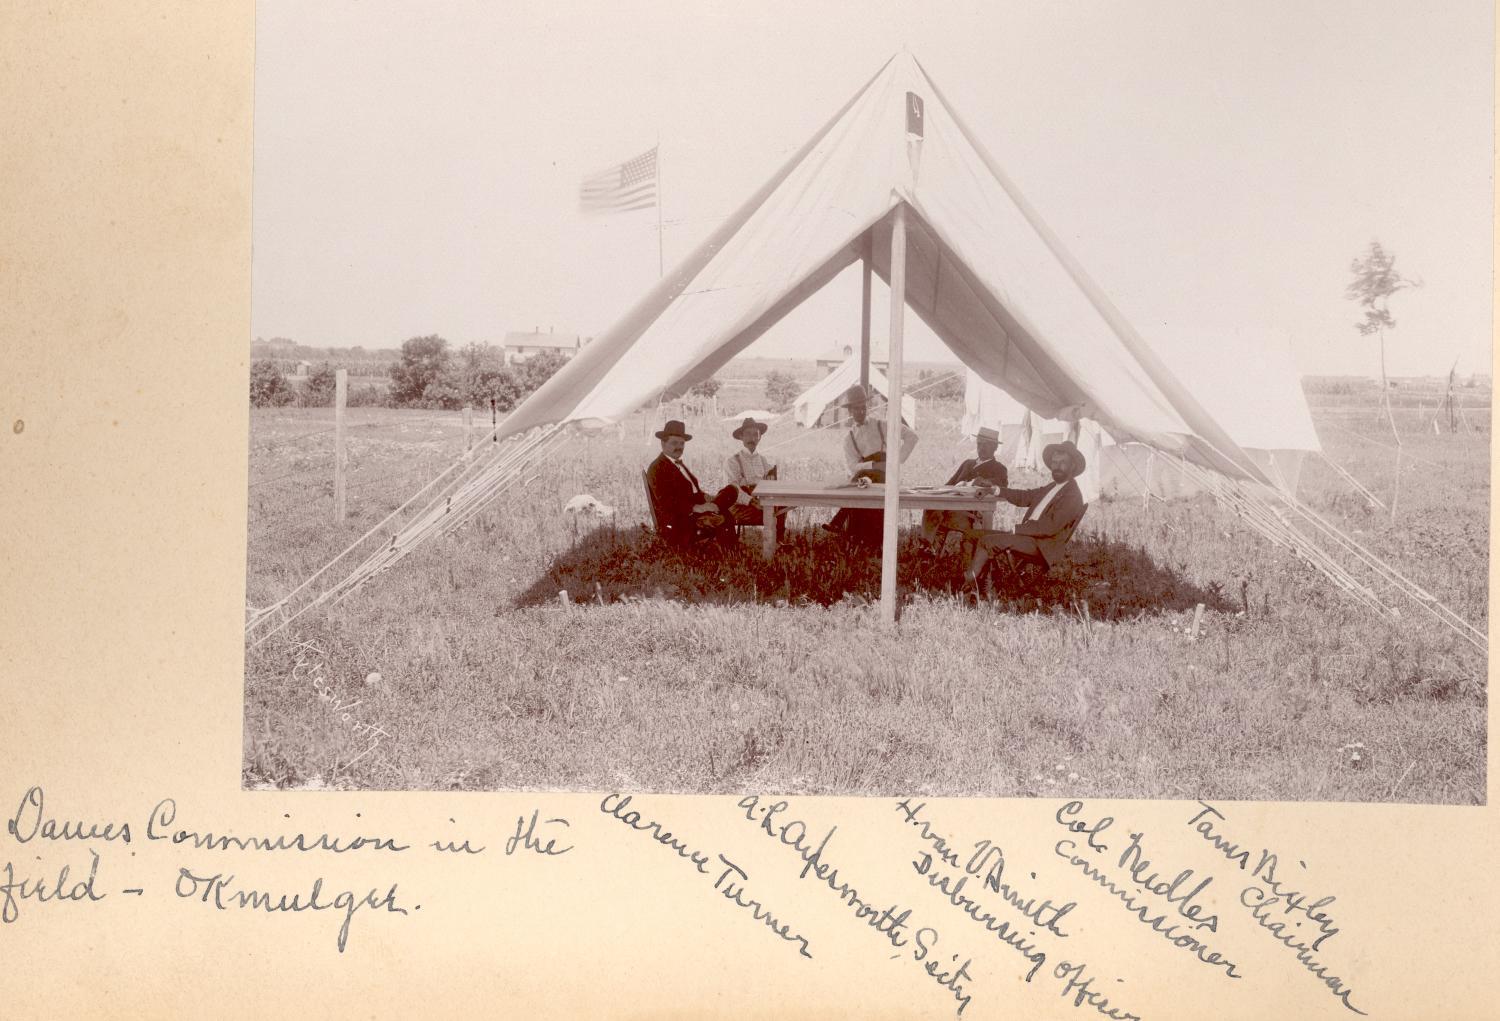 Historic photograph of five men around a table inside a white tent pitched in an open field. The men wear suits and hats; two men wear white shirts and suspenders.